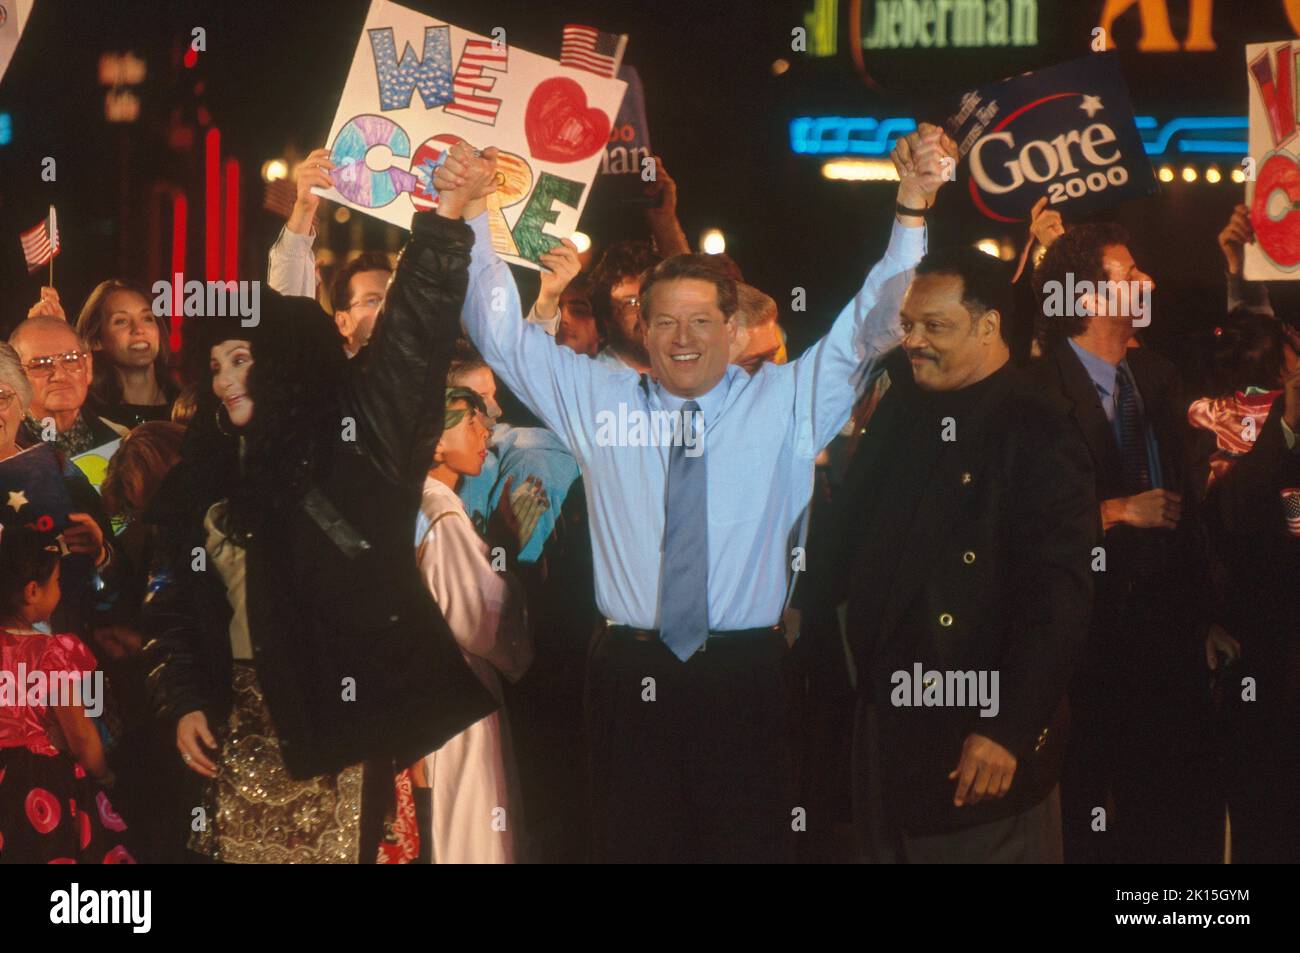 Vice-President Al Gore, during his presidential campaign, at a rally on October 31, 2000, in Westwood Village, Los Angeles, California.  Al Gore (born March 31, 1948) served as the 45th Vice President of the United States from 1993 to 2001 under President Bill Clinton. He is an environmental activist, writer and businessman. Stock Photo